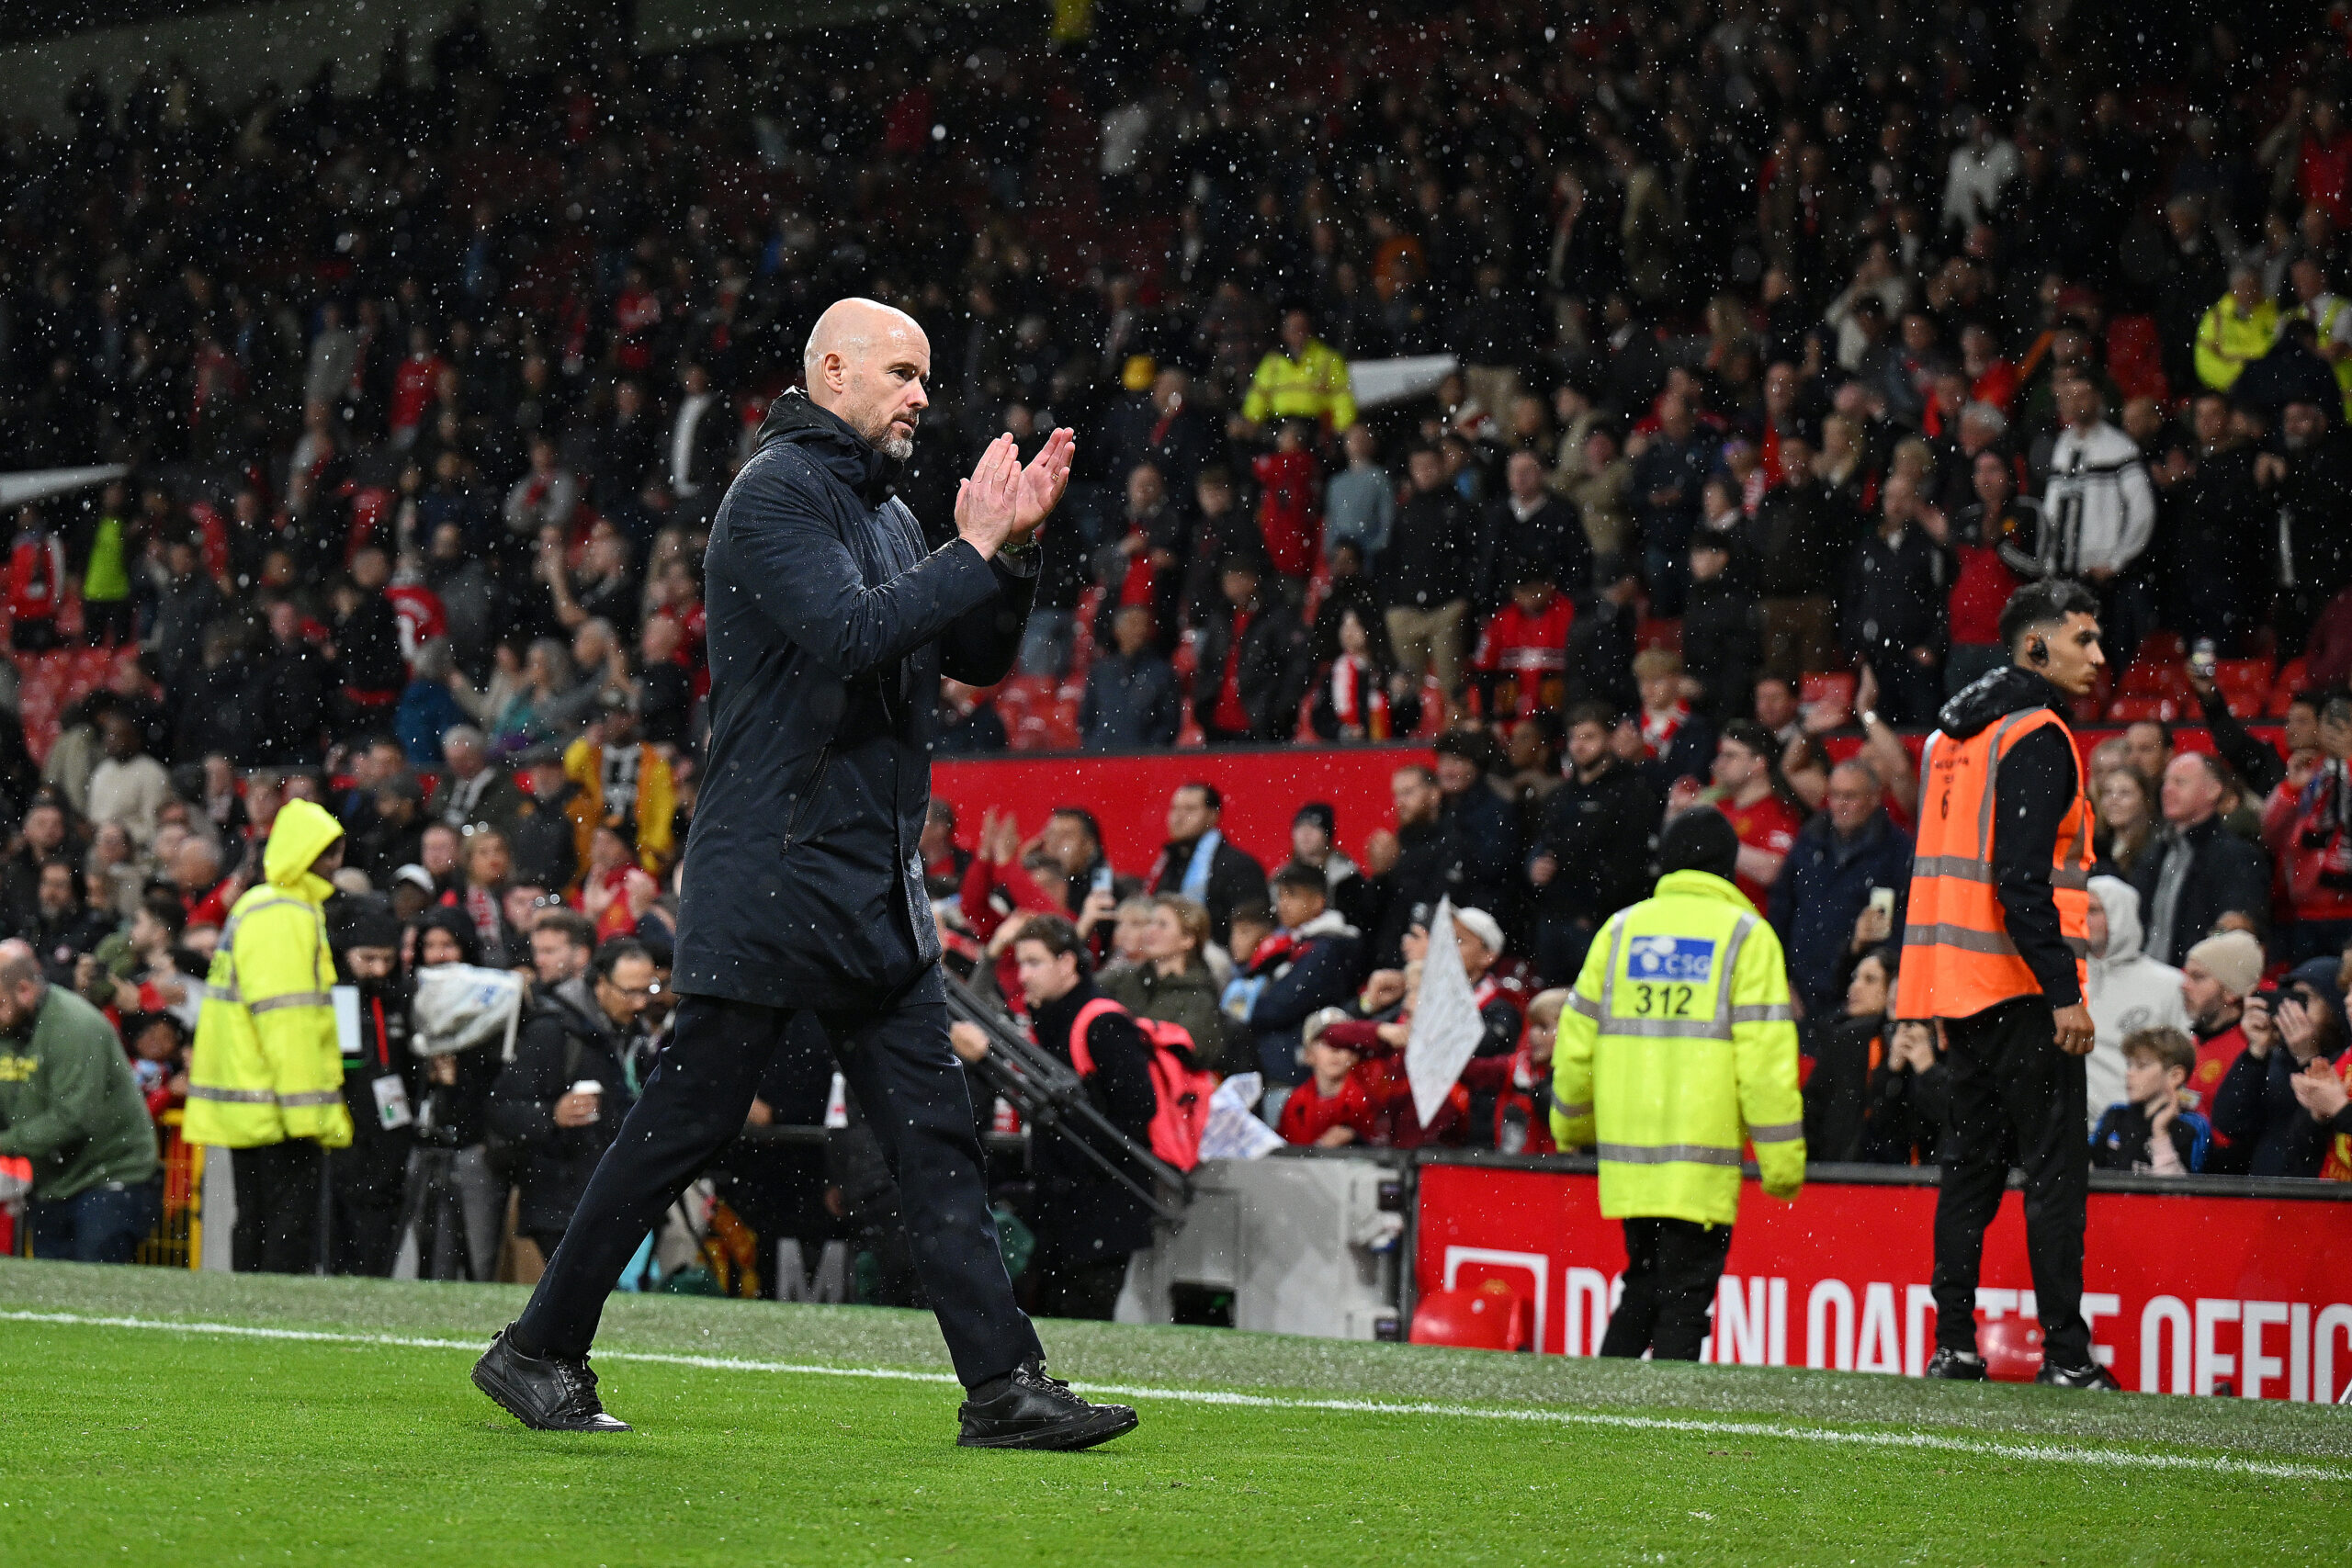 MANCHESTER, ENGLAND - OCTOBER 29: Erik ten Hag, Manager of Manchester United, applauds the fans after the team's defeat in the Premier League match between Manchester United and Manchester City at Old Trafford on October 29, 2023 in Manchester, England. (Photo by Michael Regan/Getty Images)